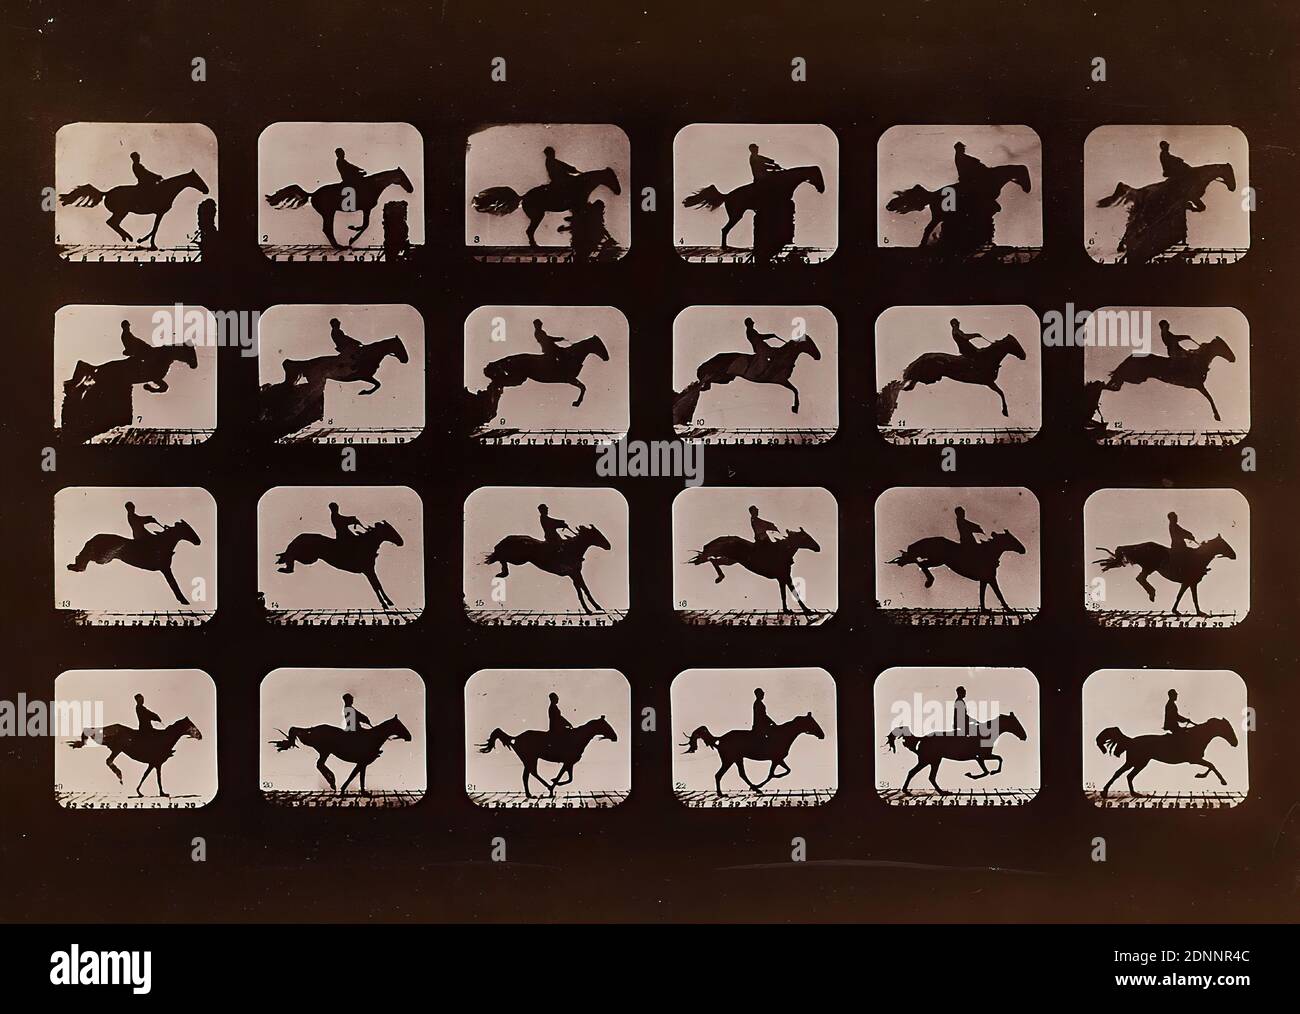 Eadweard Muybridge, Motion Study, Study of an Animal in Motion, albumin paper, black and white positive process, sheet size: height: 16.00 cm; width: 22.40 cm, horse, movement, jumping, horse Stock Photo